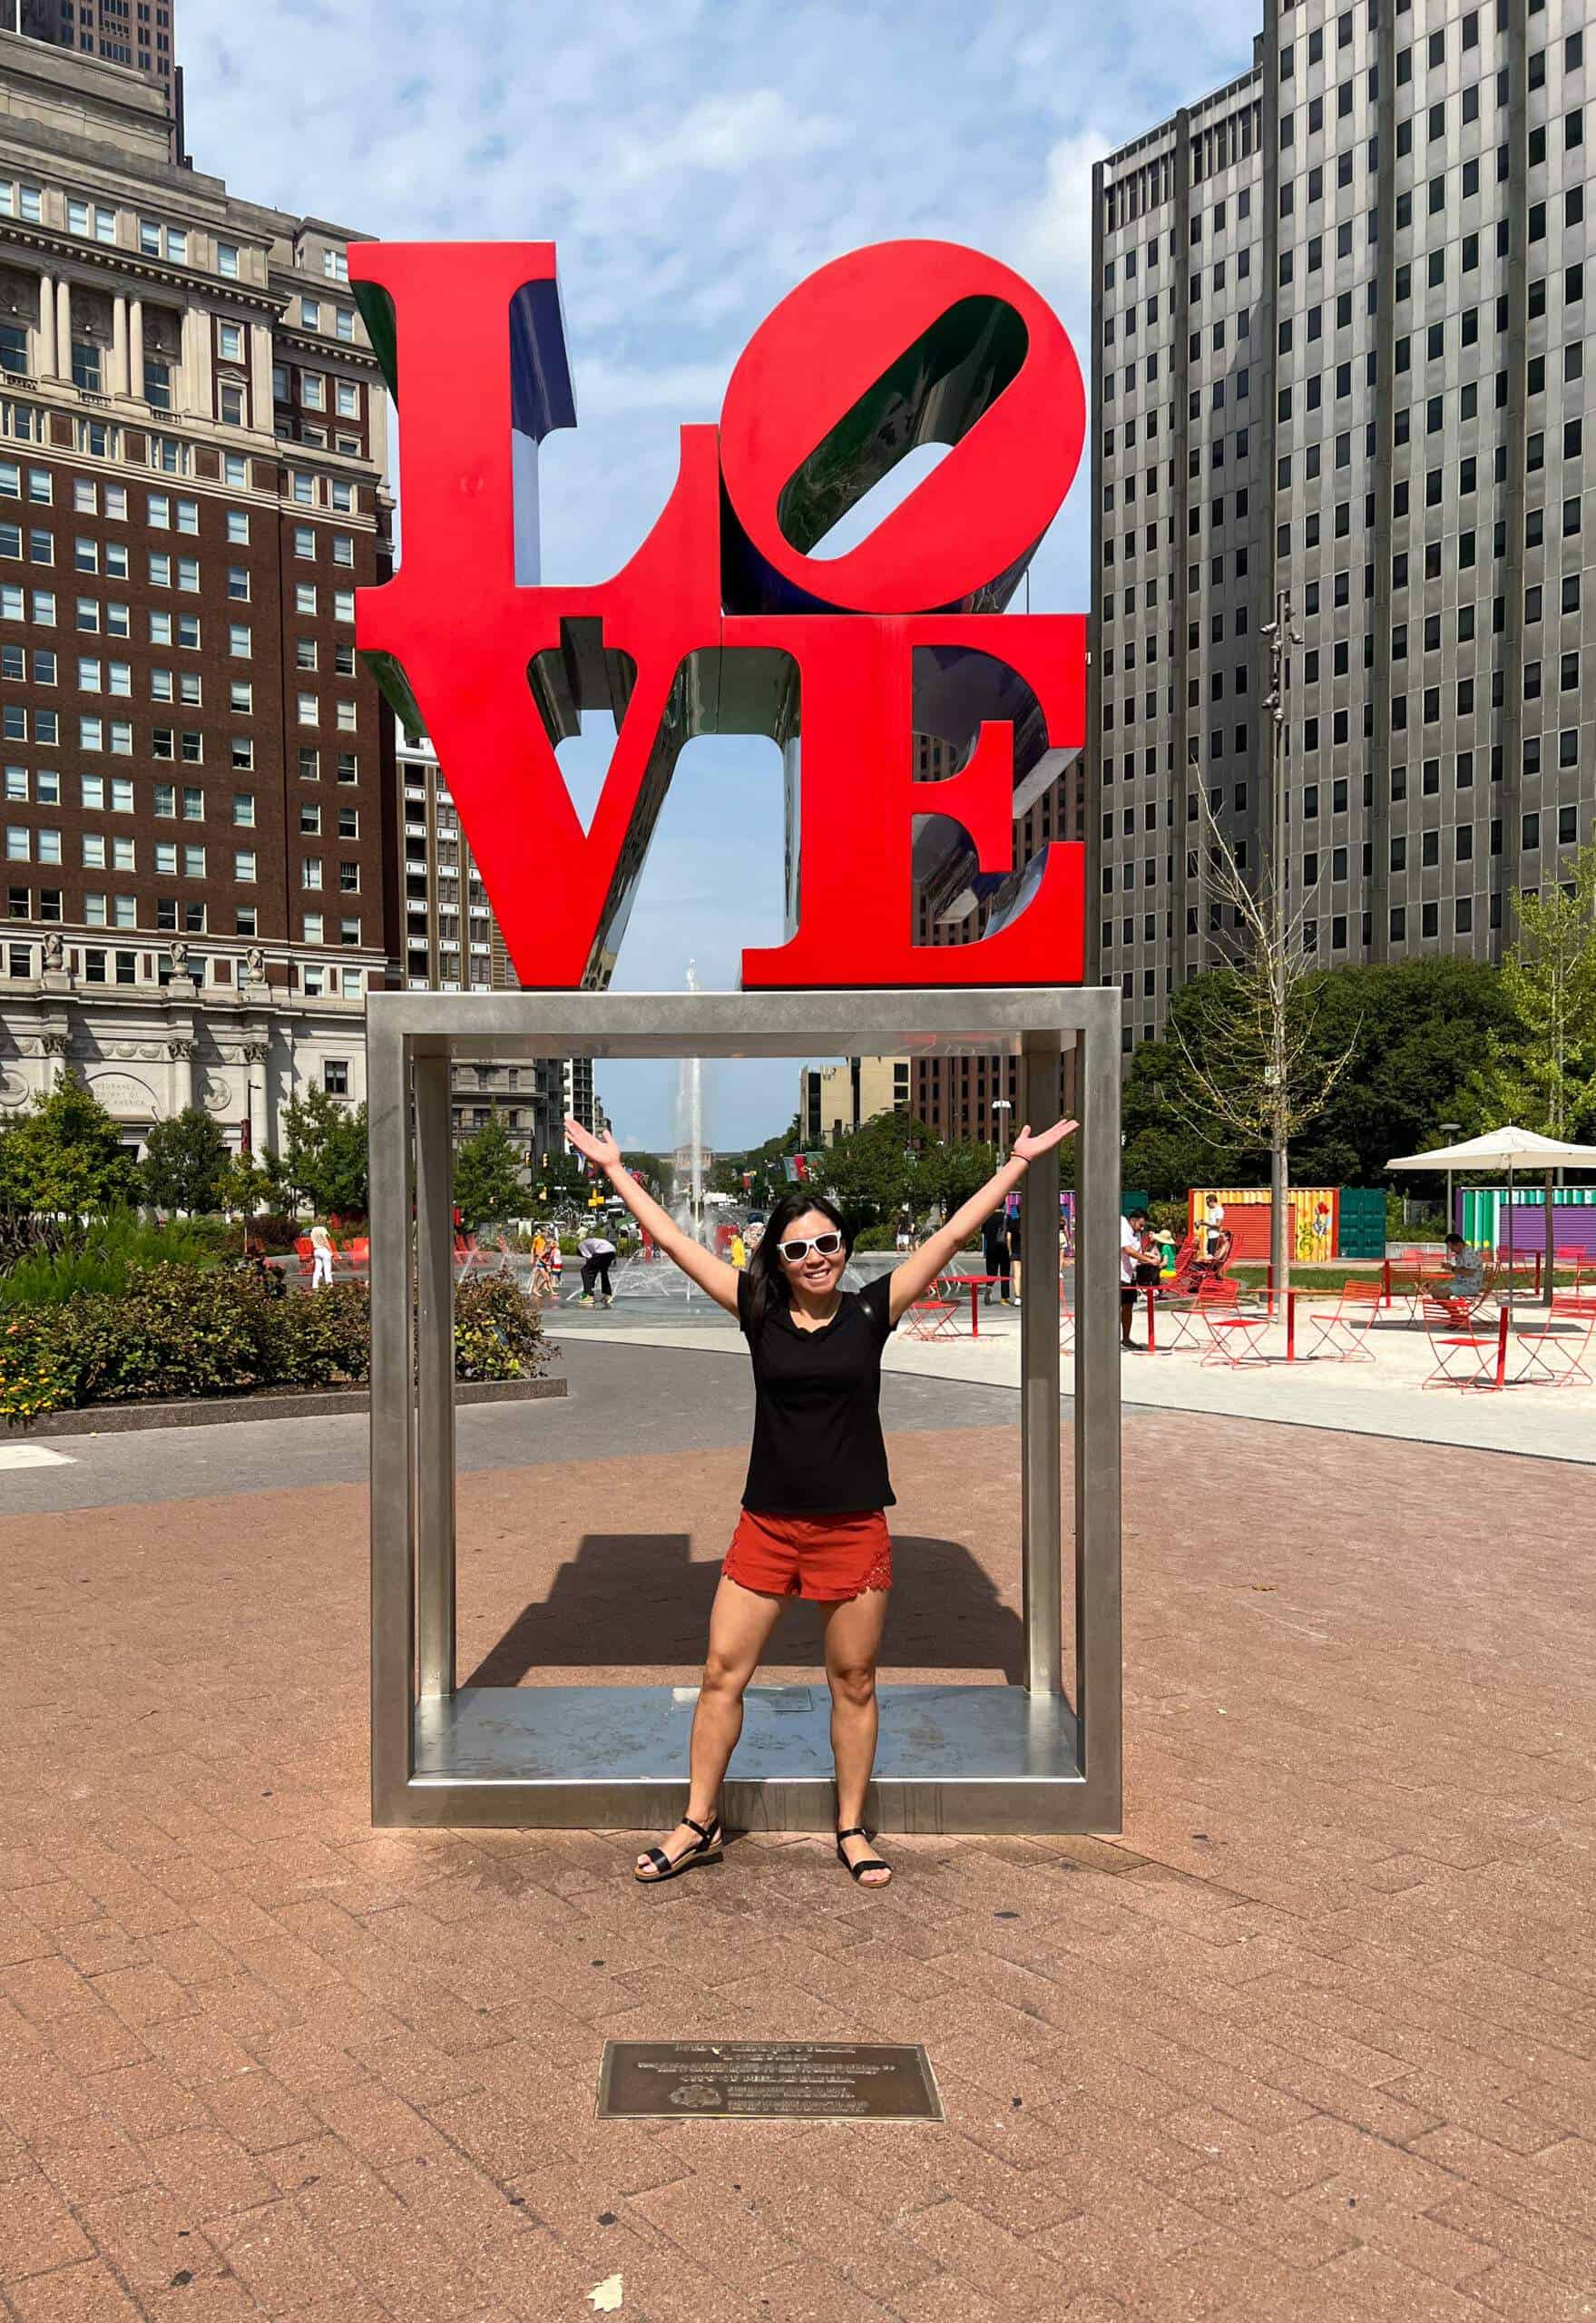 Standing in front of the LOVE sculpture in Love Park, Philadelphia. It’s a hot and bright summer day and the sculpture is book-cased by 2 historic Philadelphia buildings.